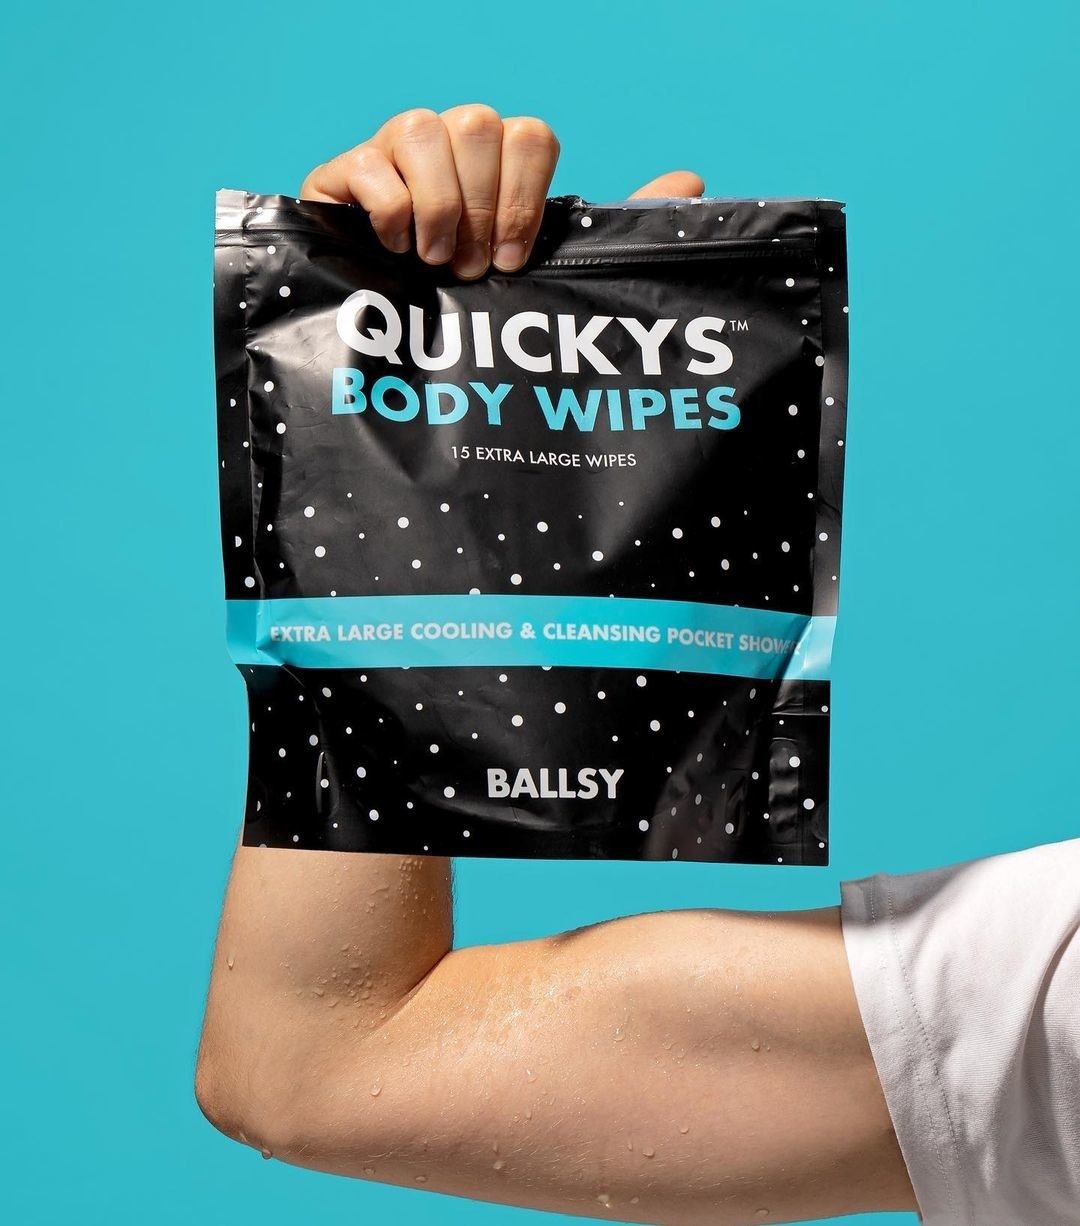 Someone holding up a pack of the body wipes while flexing their bicep